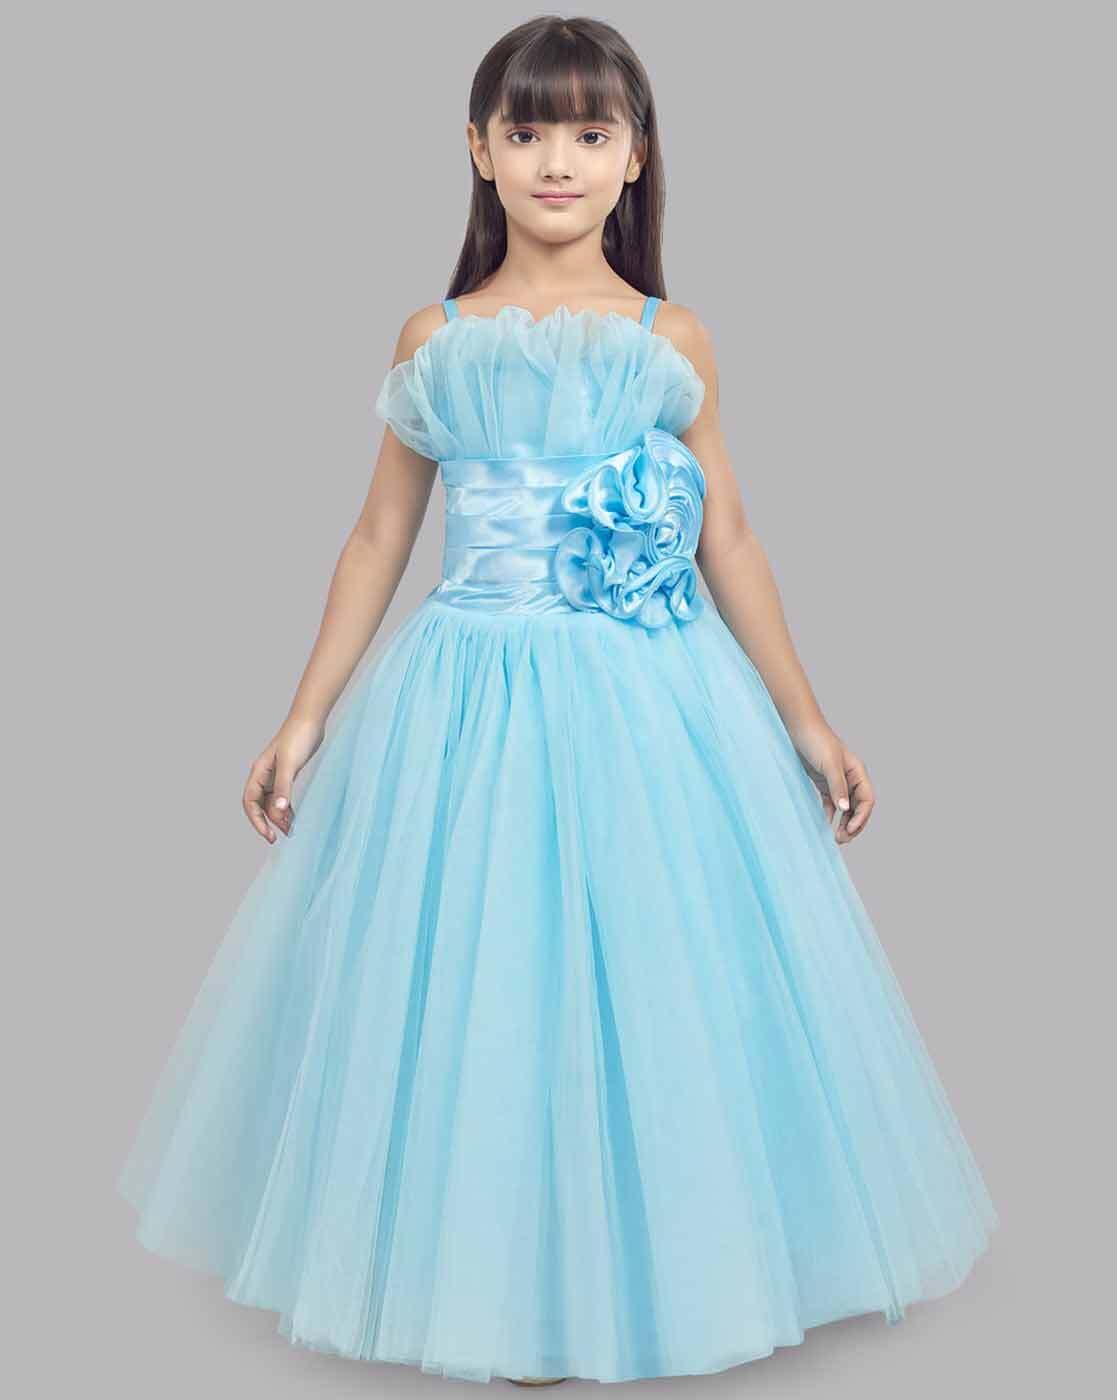 Elegant Beaded Neck First Communion Dress For Girls With Pink Sash And  Crystal Tulle Ball Gown For Flower Girl Wedding Attire From  Uniquebridalboutique, $85.26 | DHgate.Com